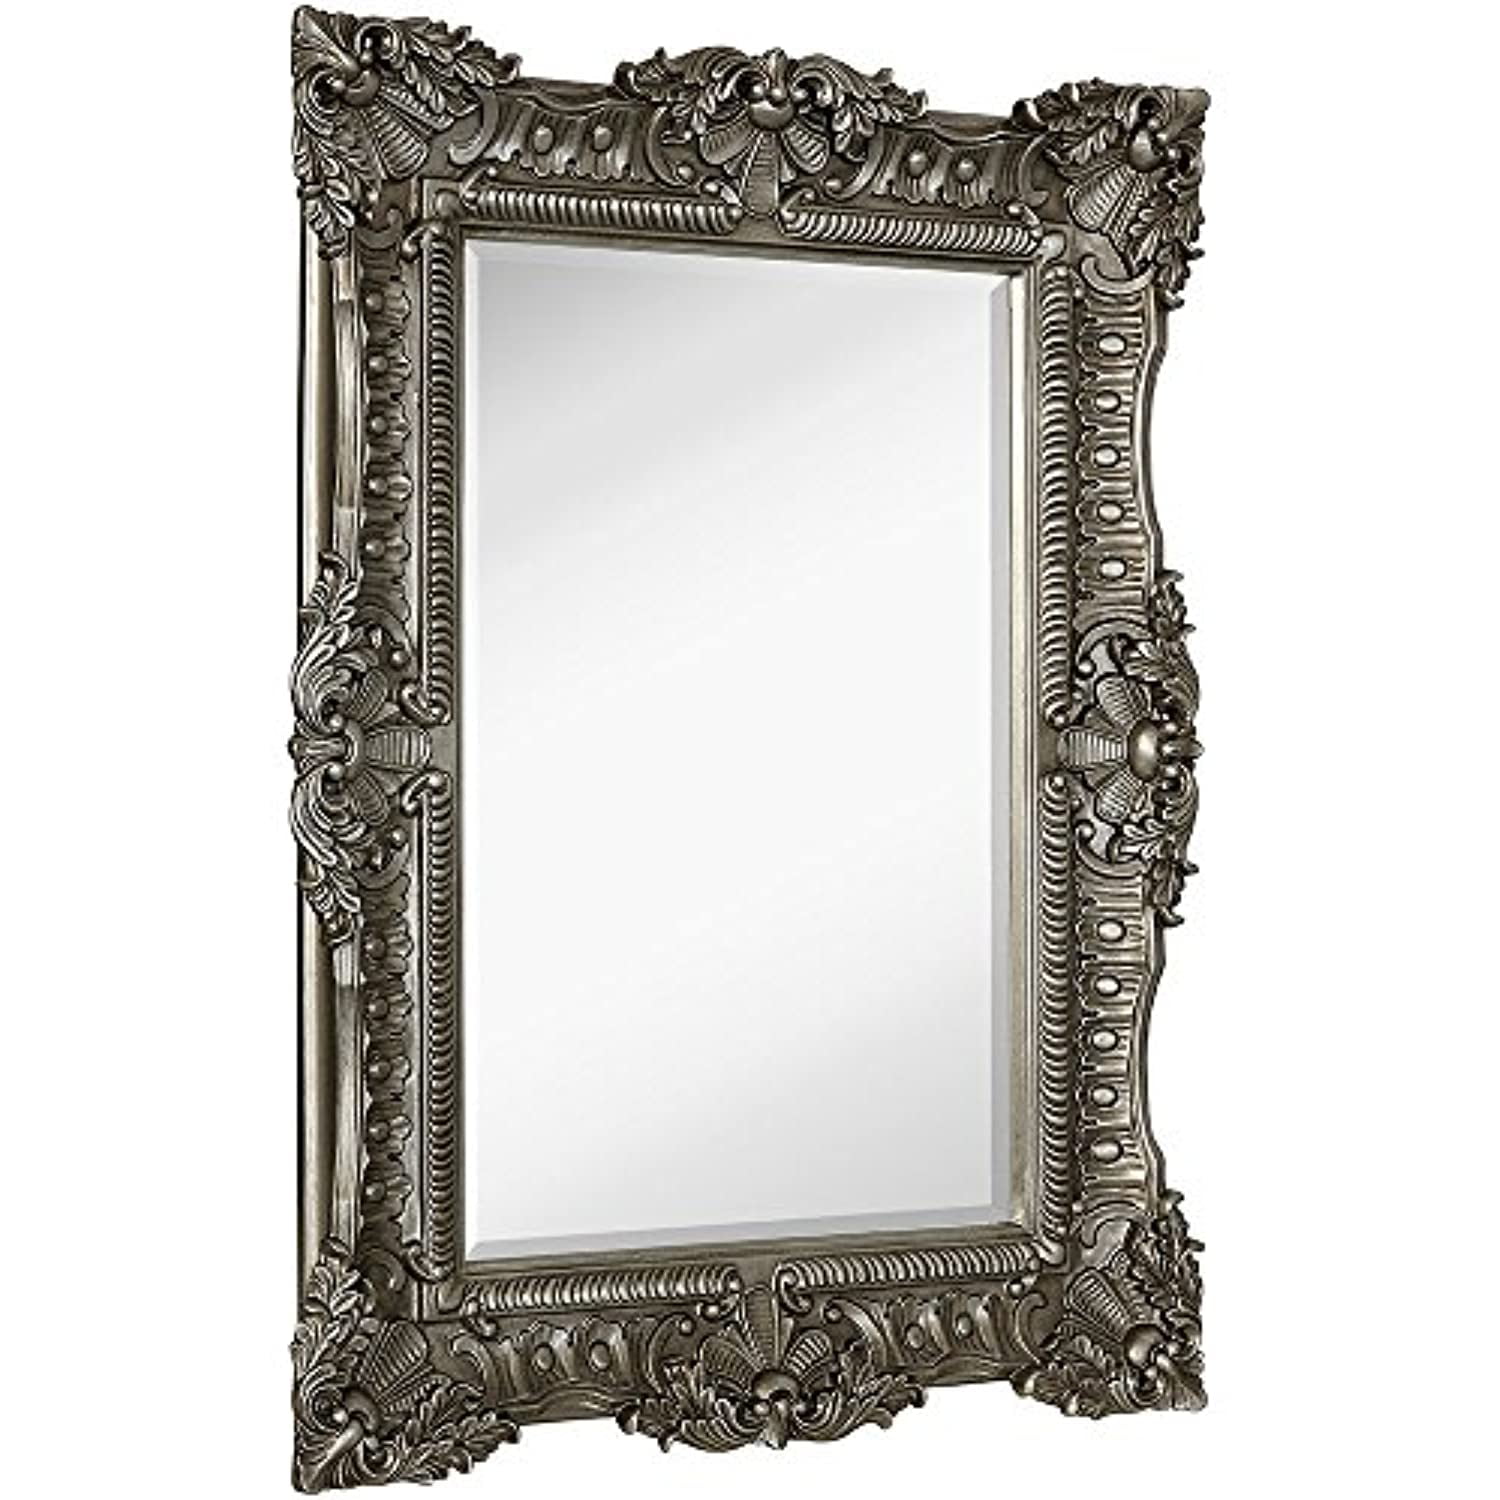 Silver Ornate Large Luxury Baroque Style Mirror 